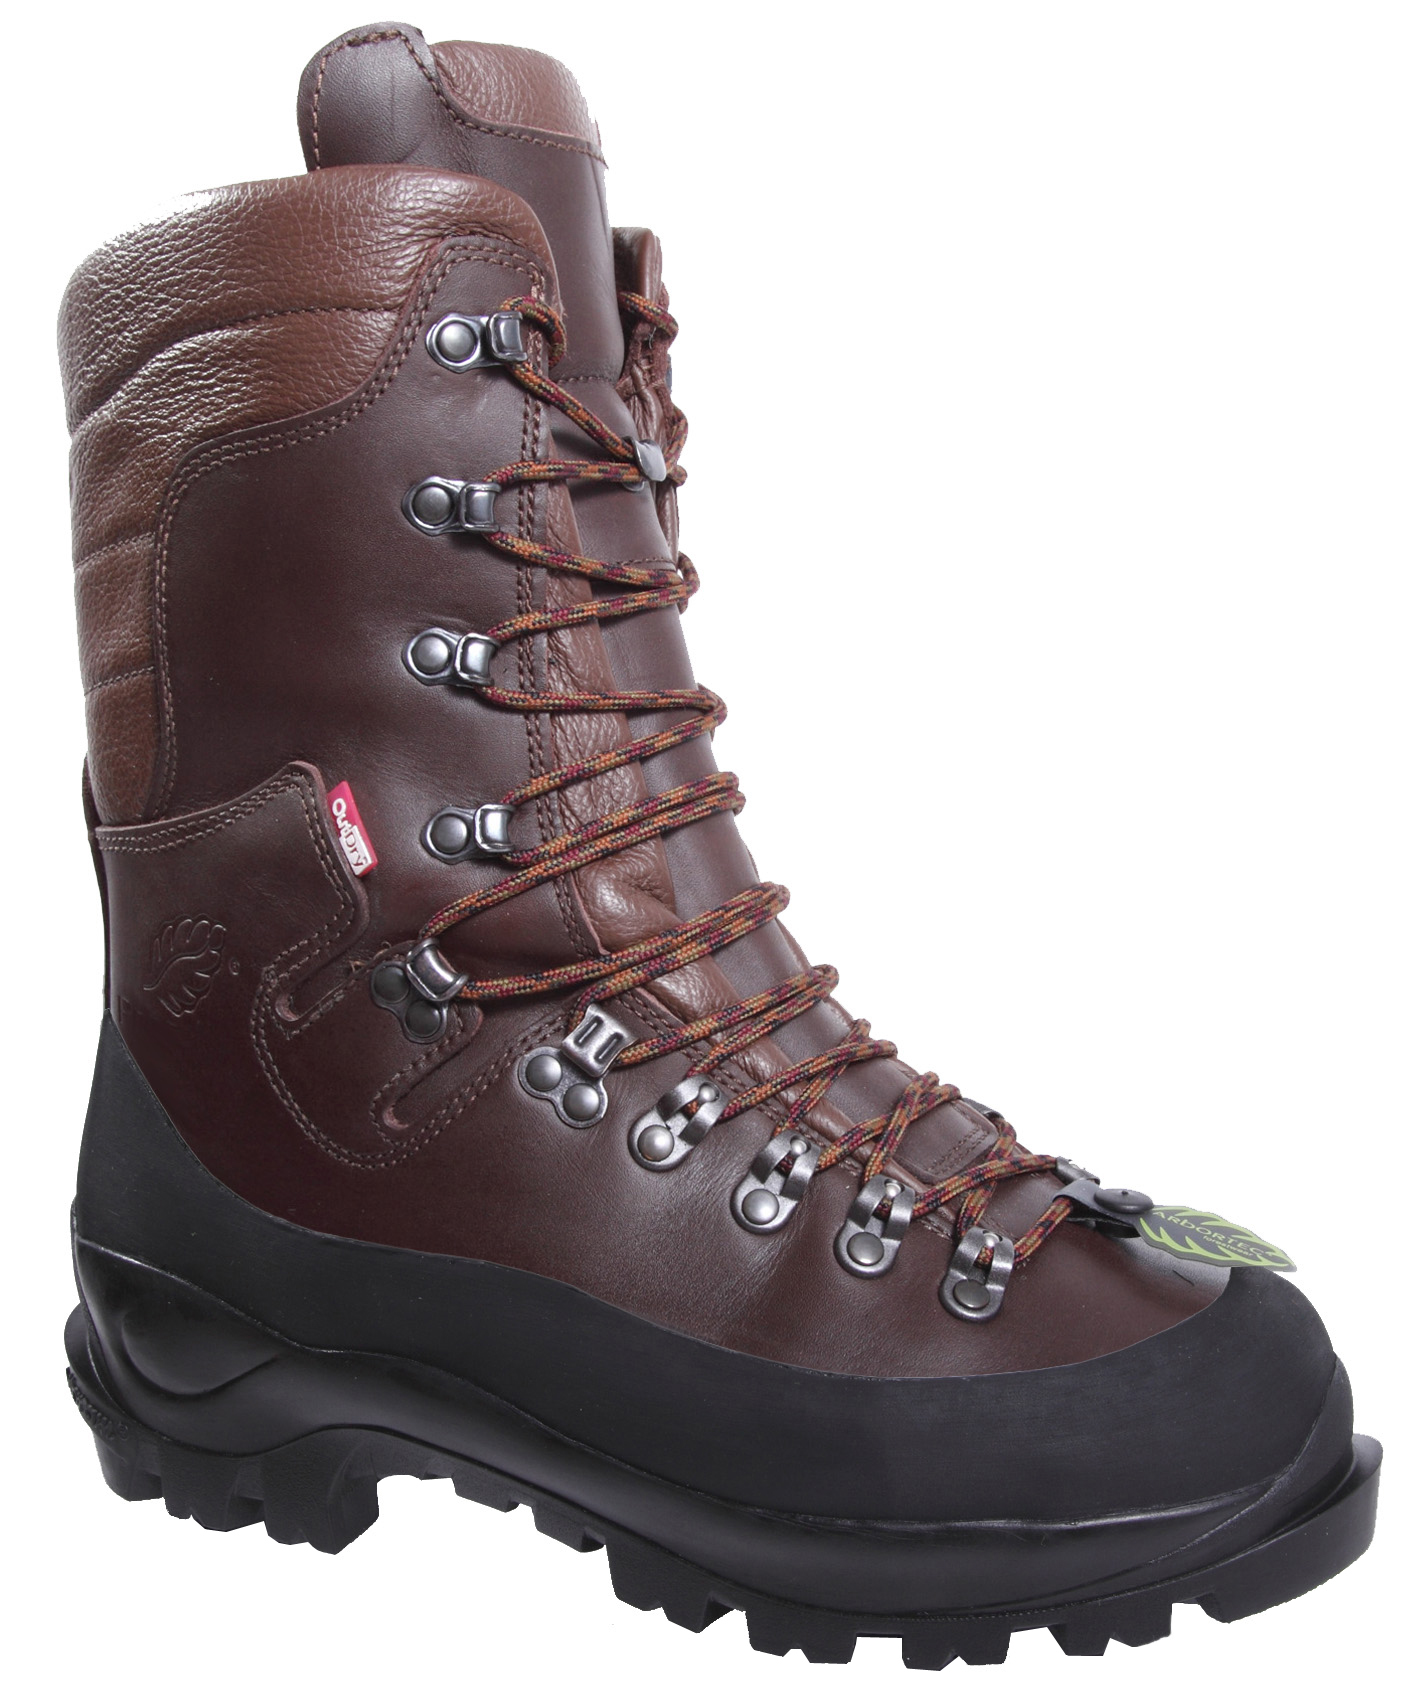 Buy > boots for chainsaw work > in stock